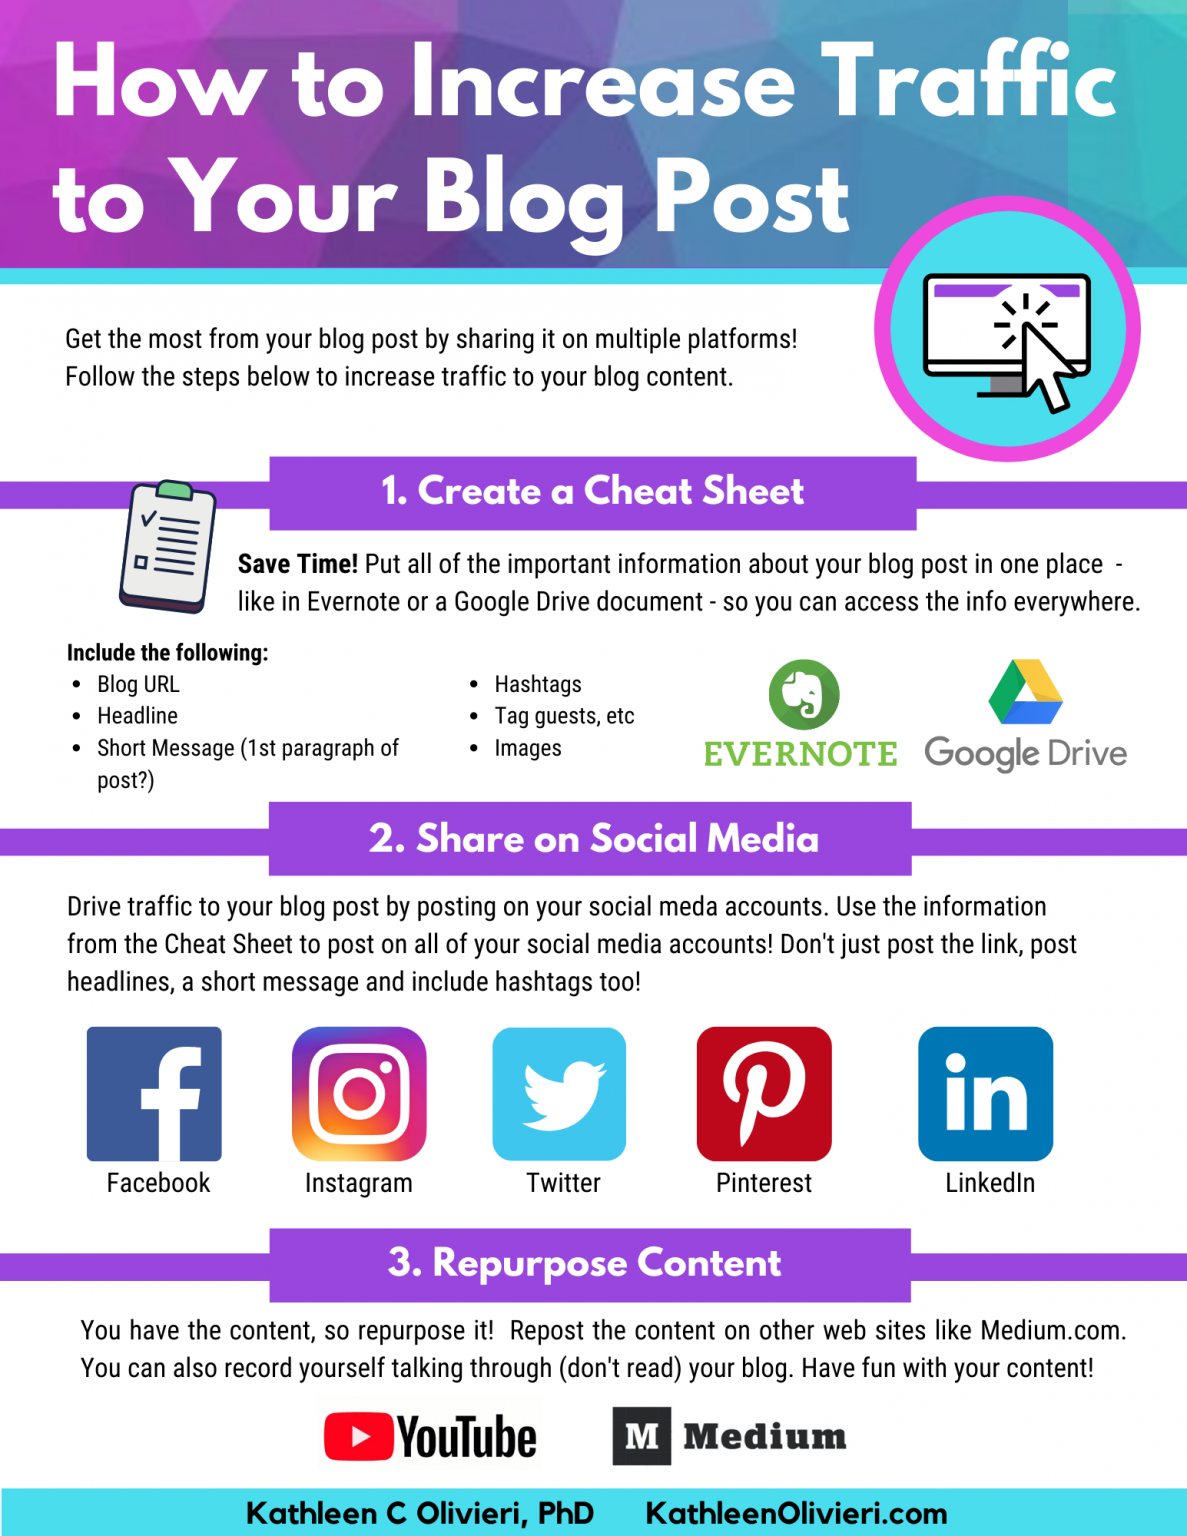 How to Increase Traffic to Your Blog Post - Kathleen Olivieri